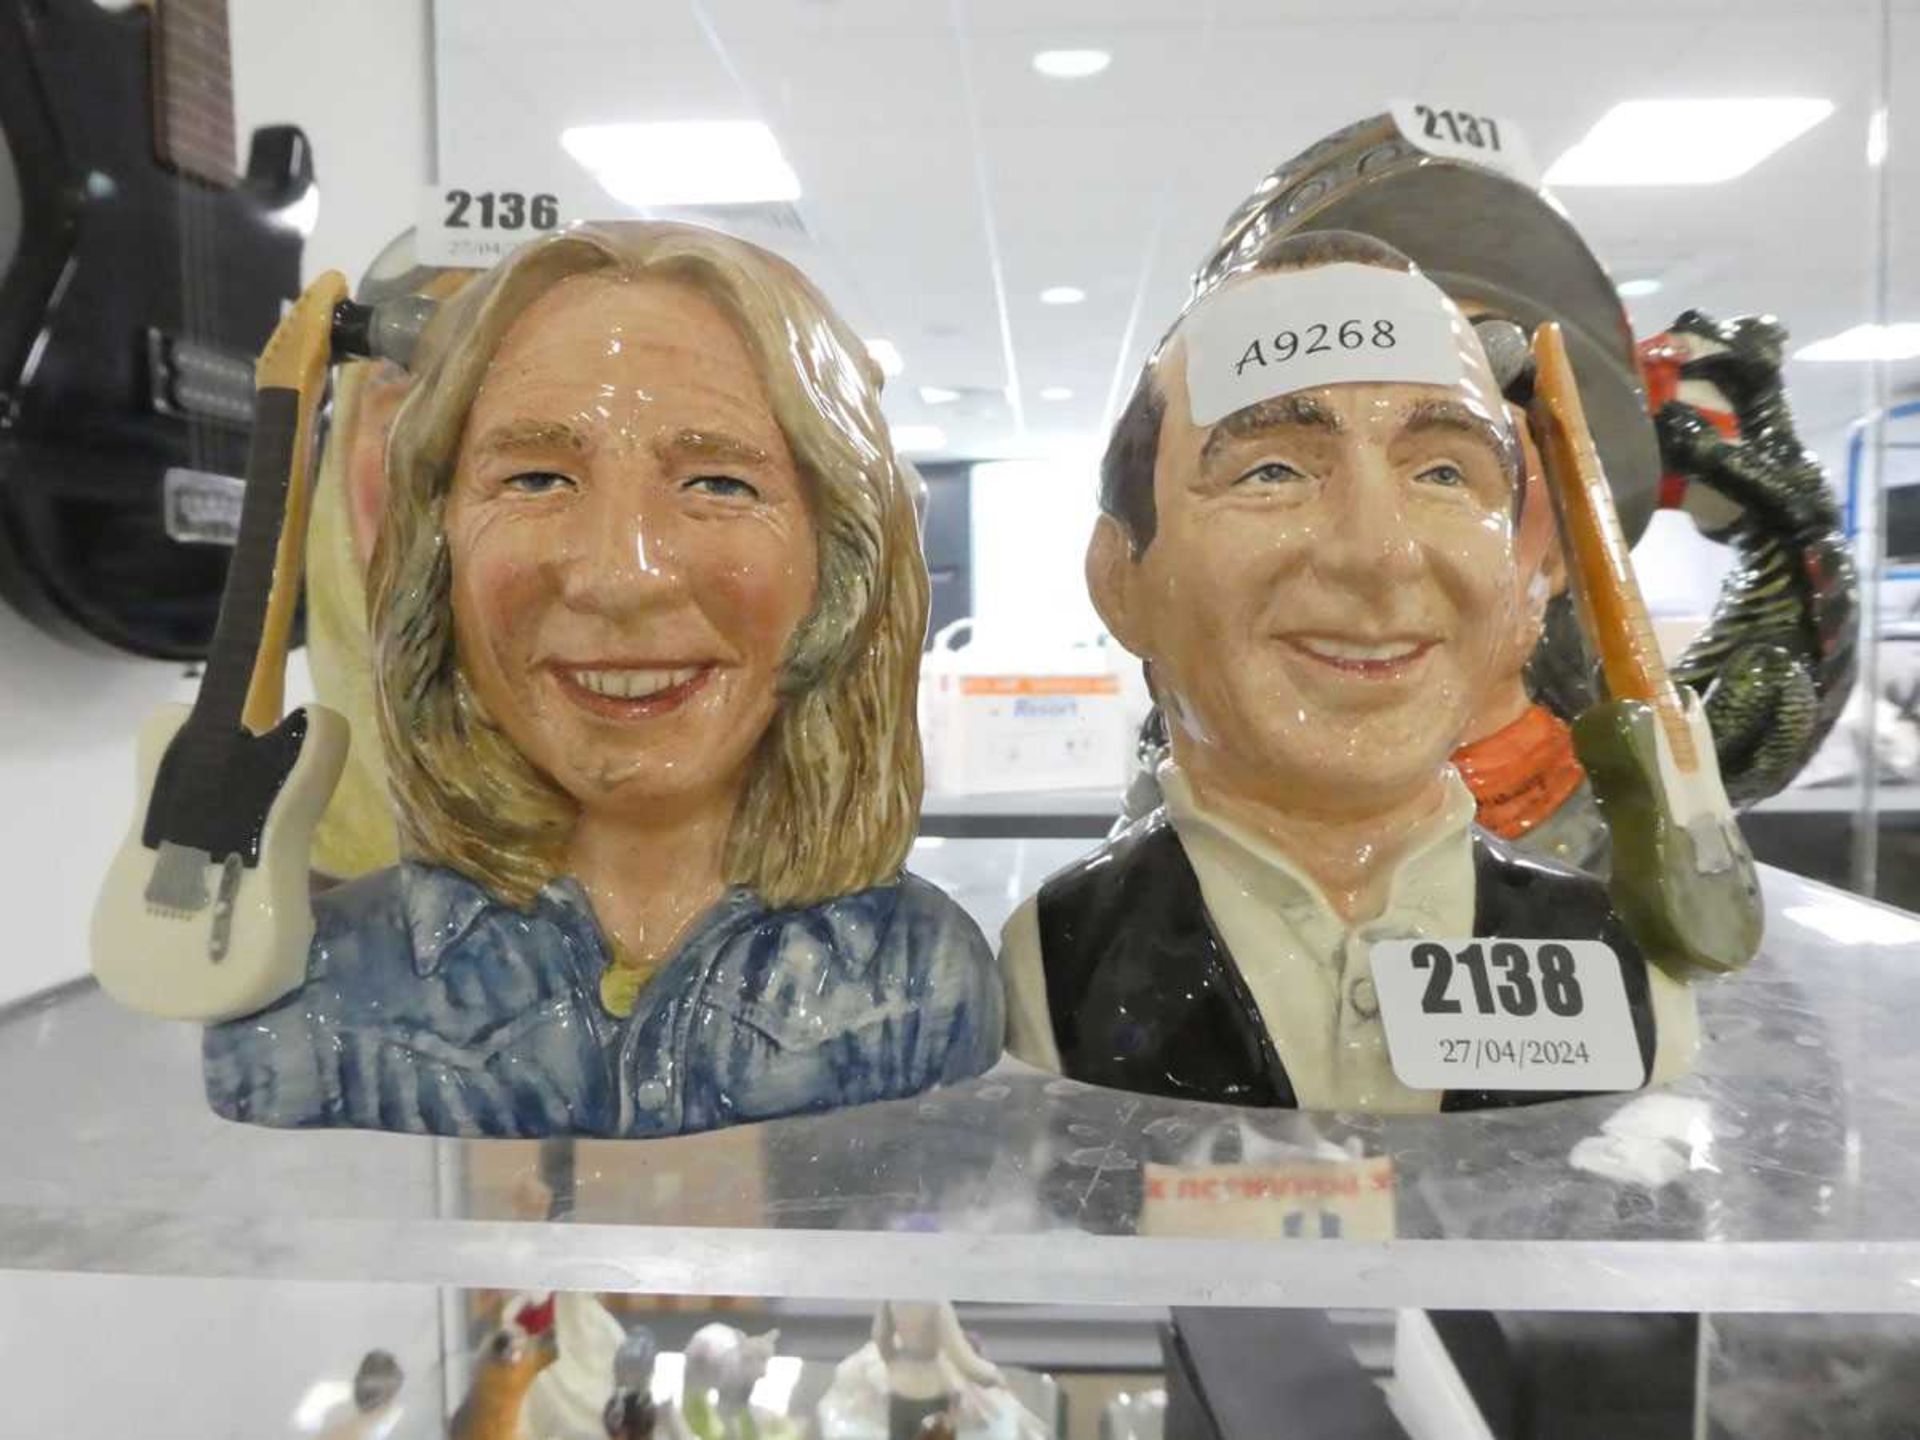 2 Royal Doulton Character Jugs of Francis Rossi and Rick Parfitt (Status Quo), limited ed. and